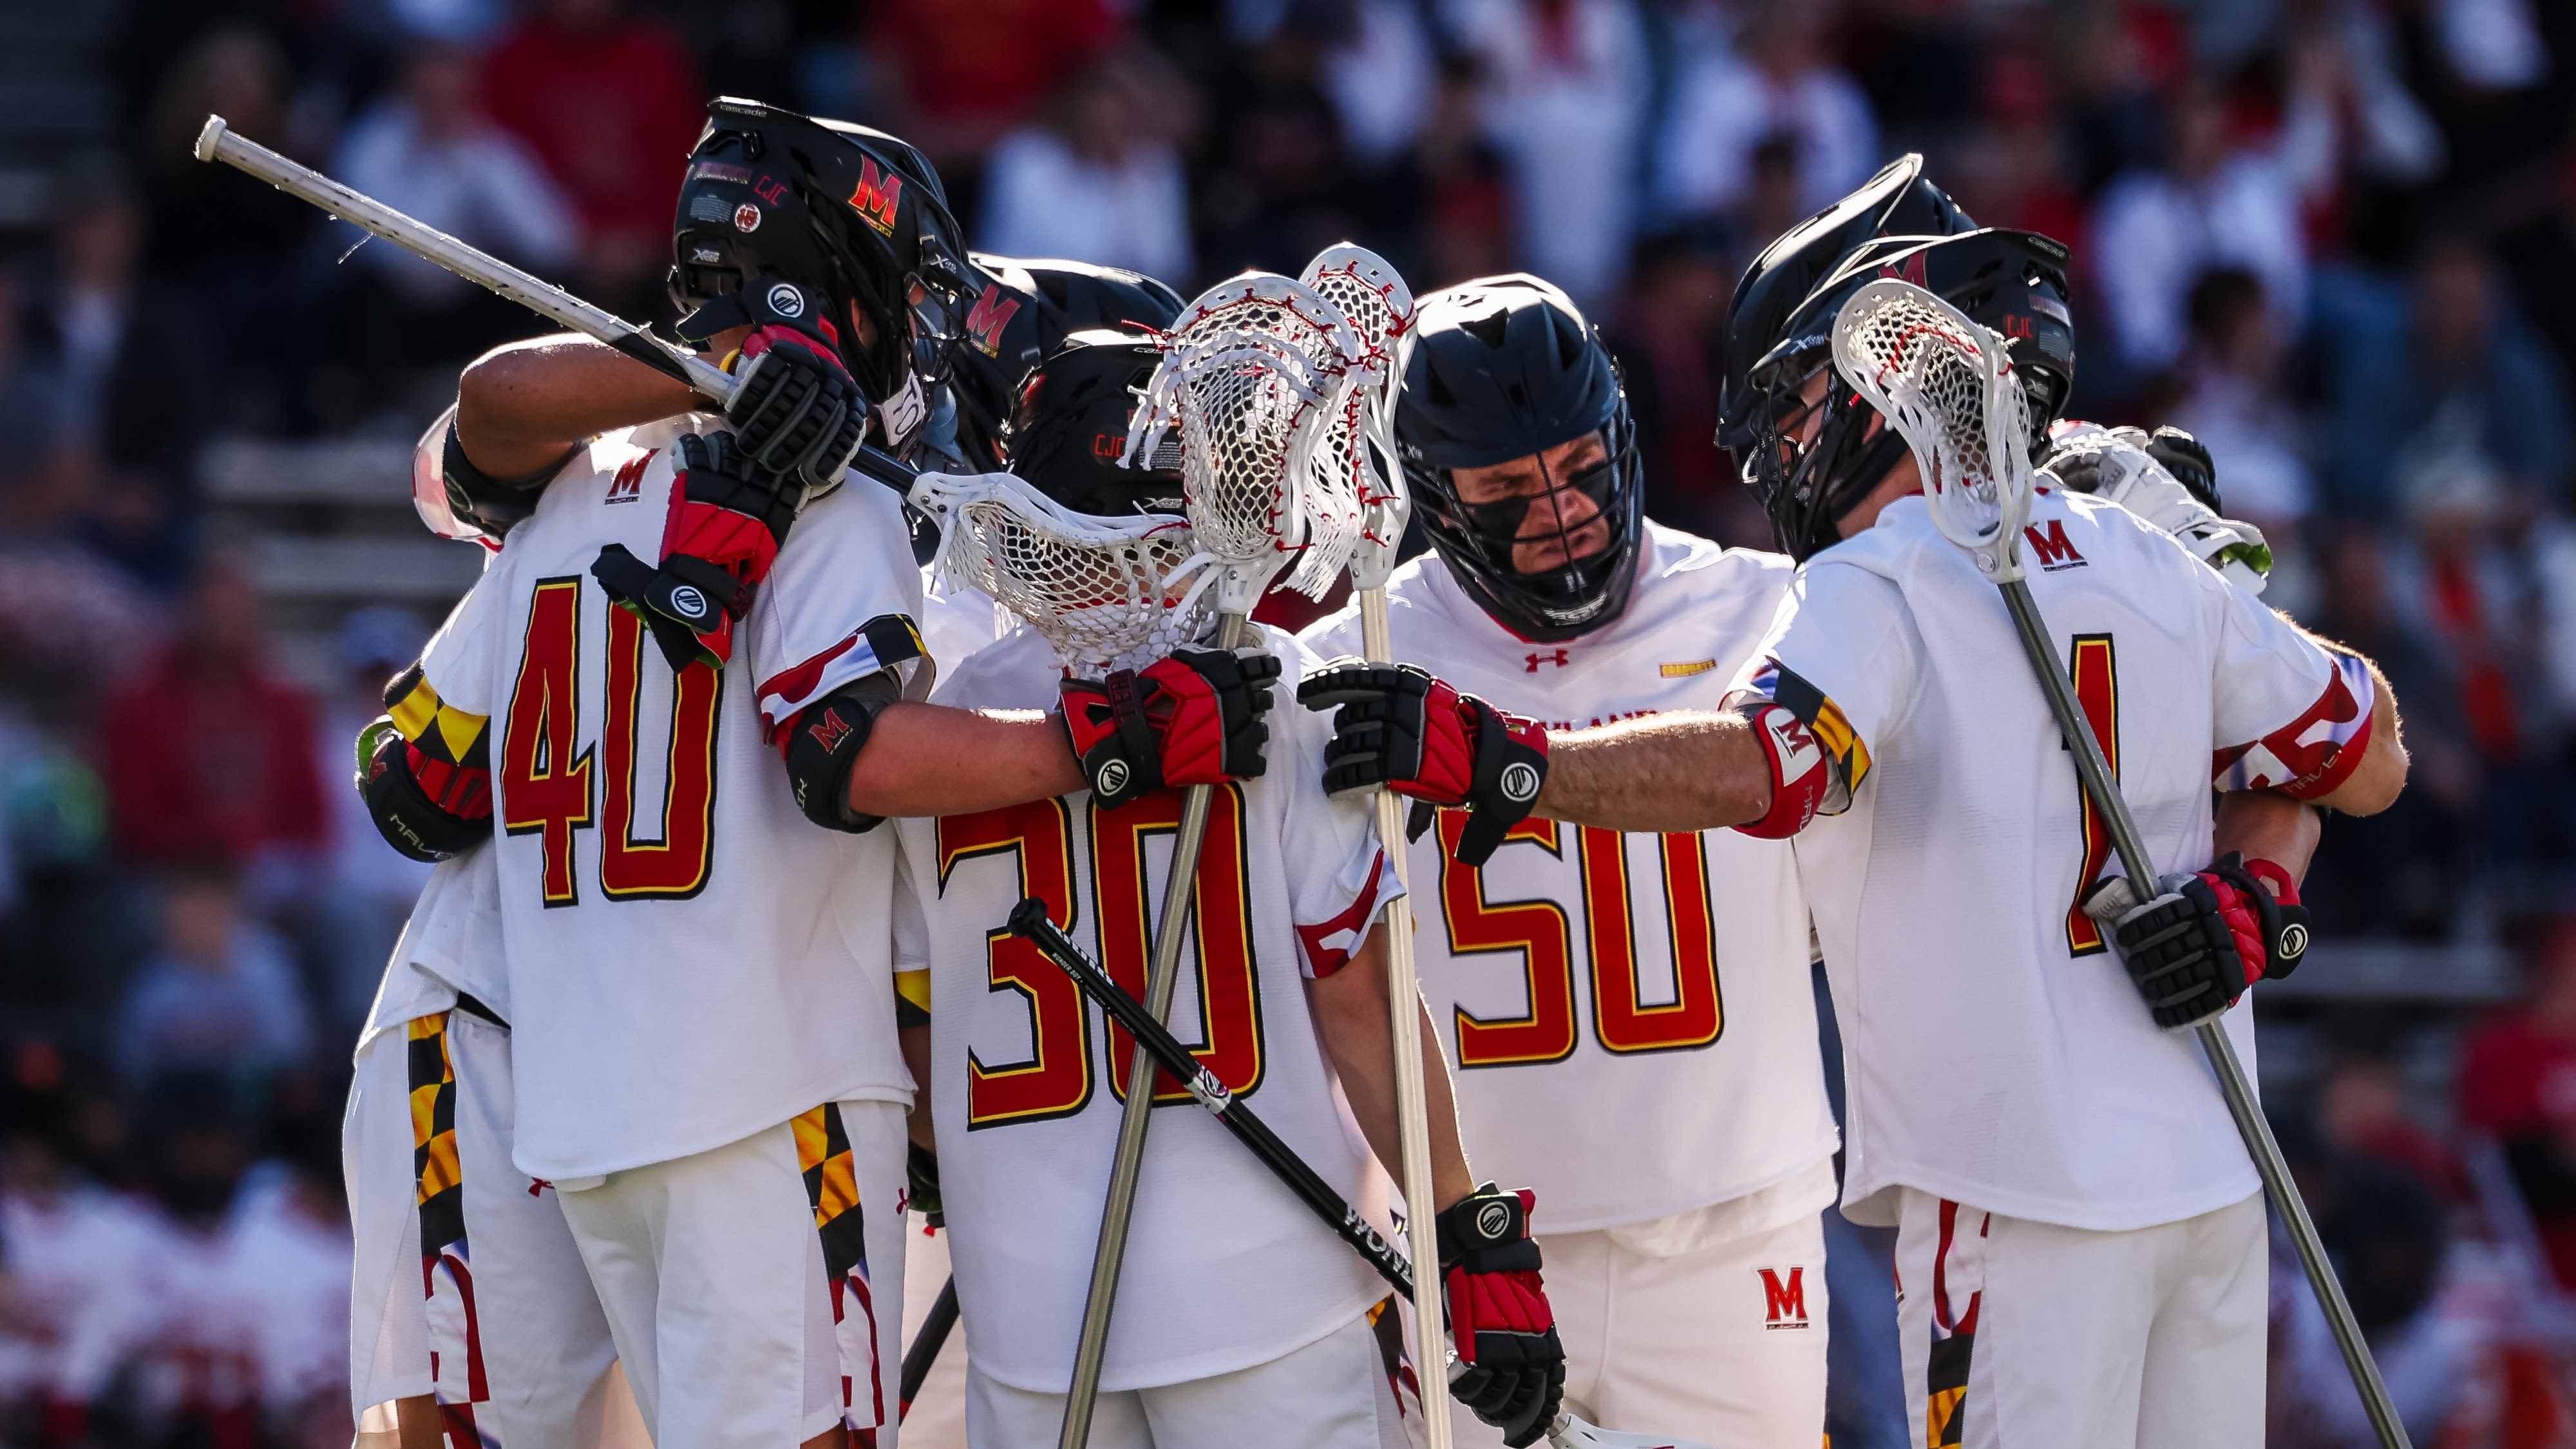 Maryland routs Princeton in NCAA men’s lacrosse opener, and Duke is next